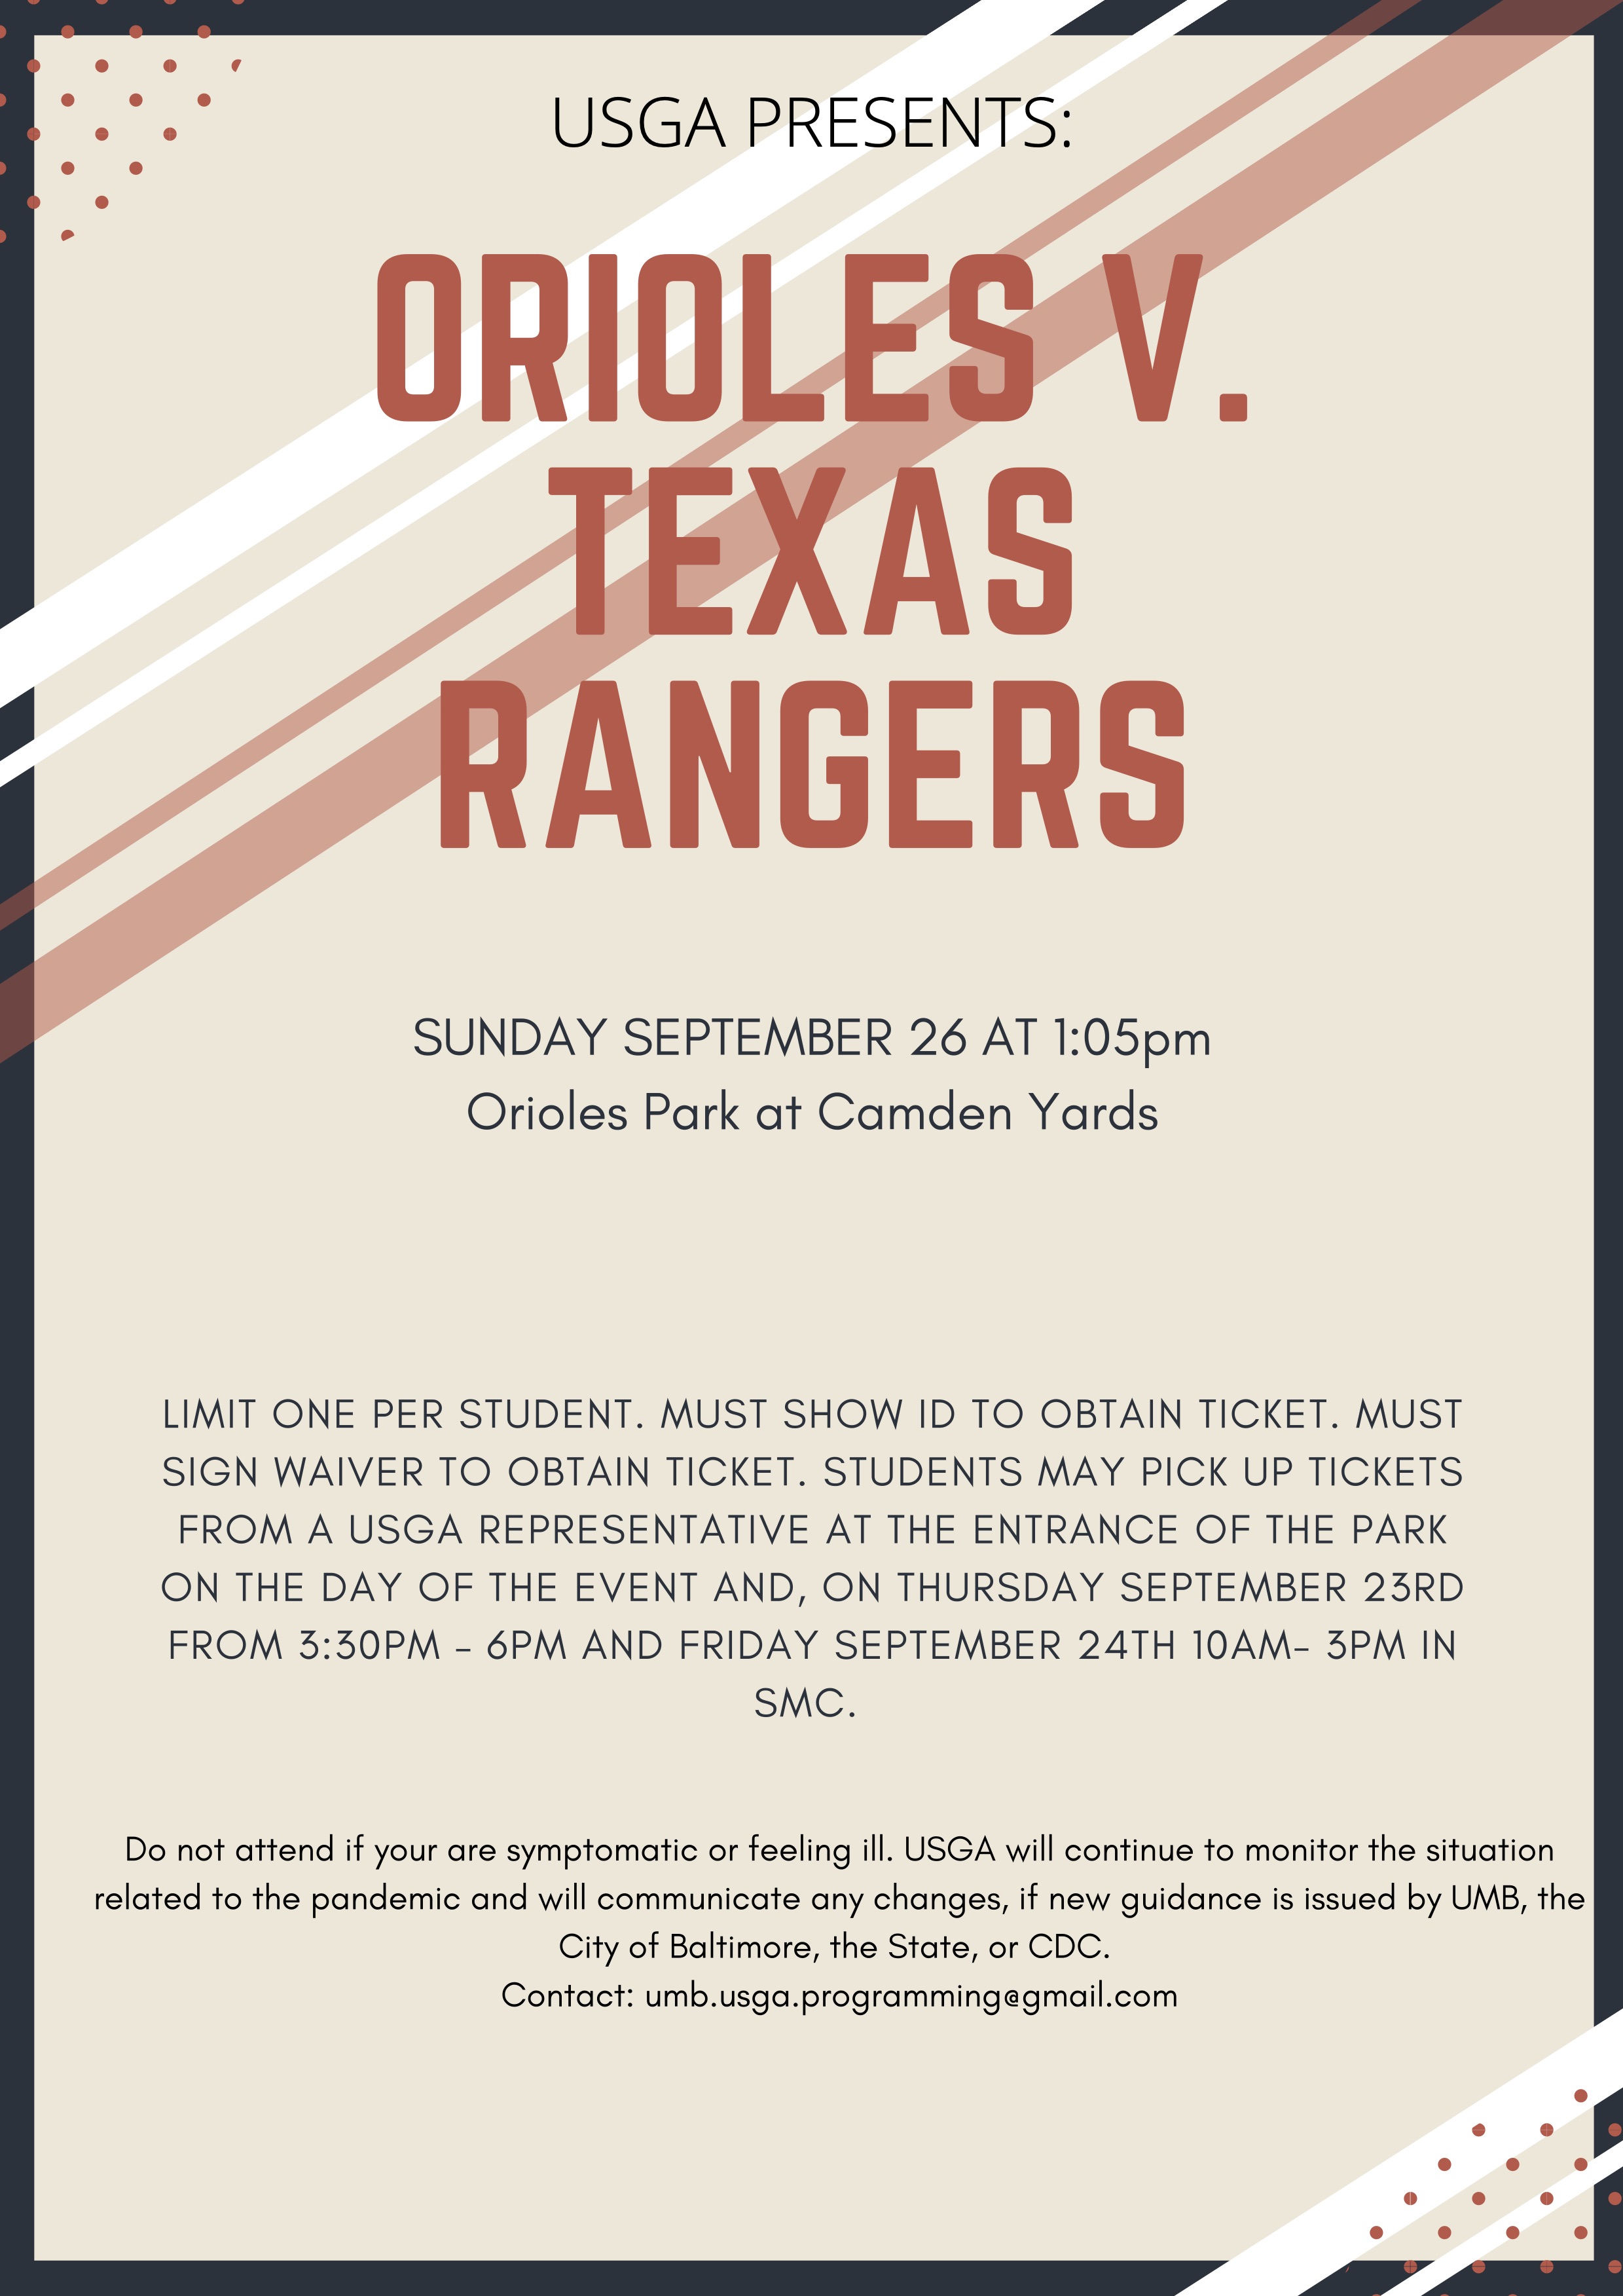 Join USGA as We Watch the Orioles Take On the Texas Rangers on